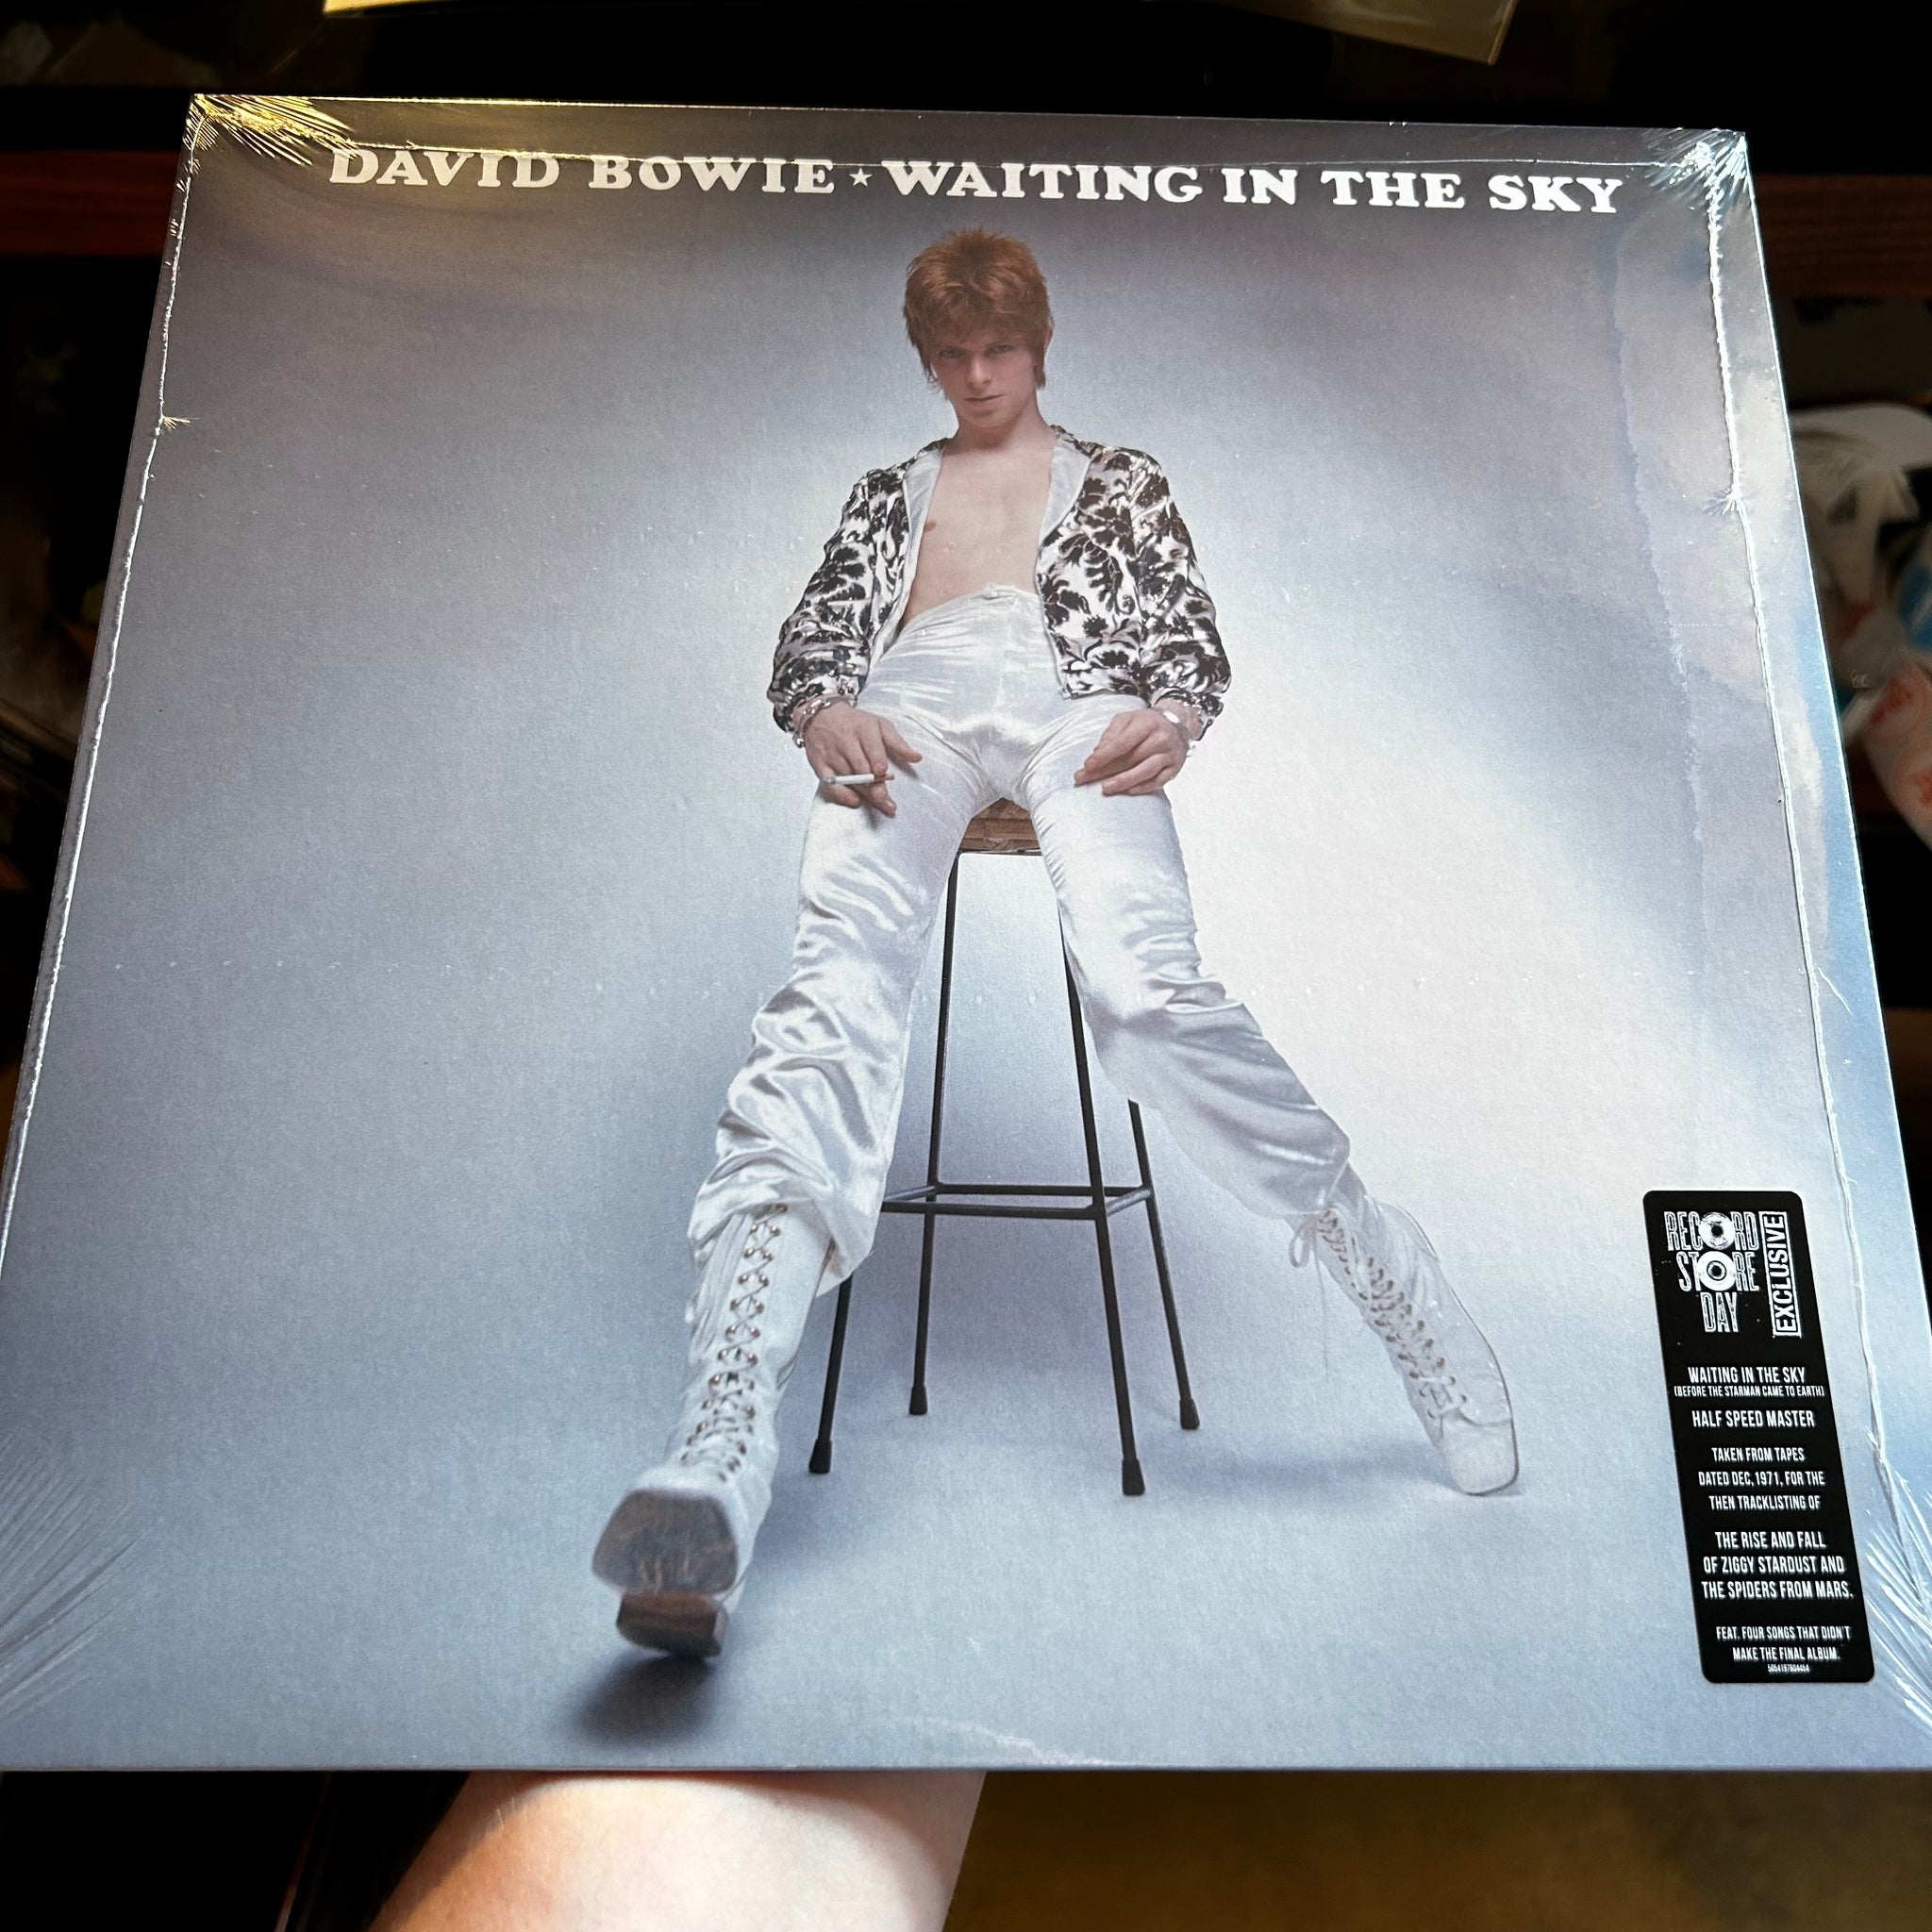 DAVID BOWIE - WAITING IN THE SKY (BEFORE THE STARMAN CAME TO EARTH 